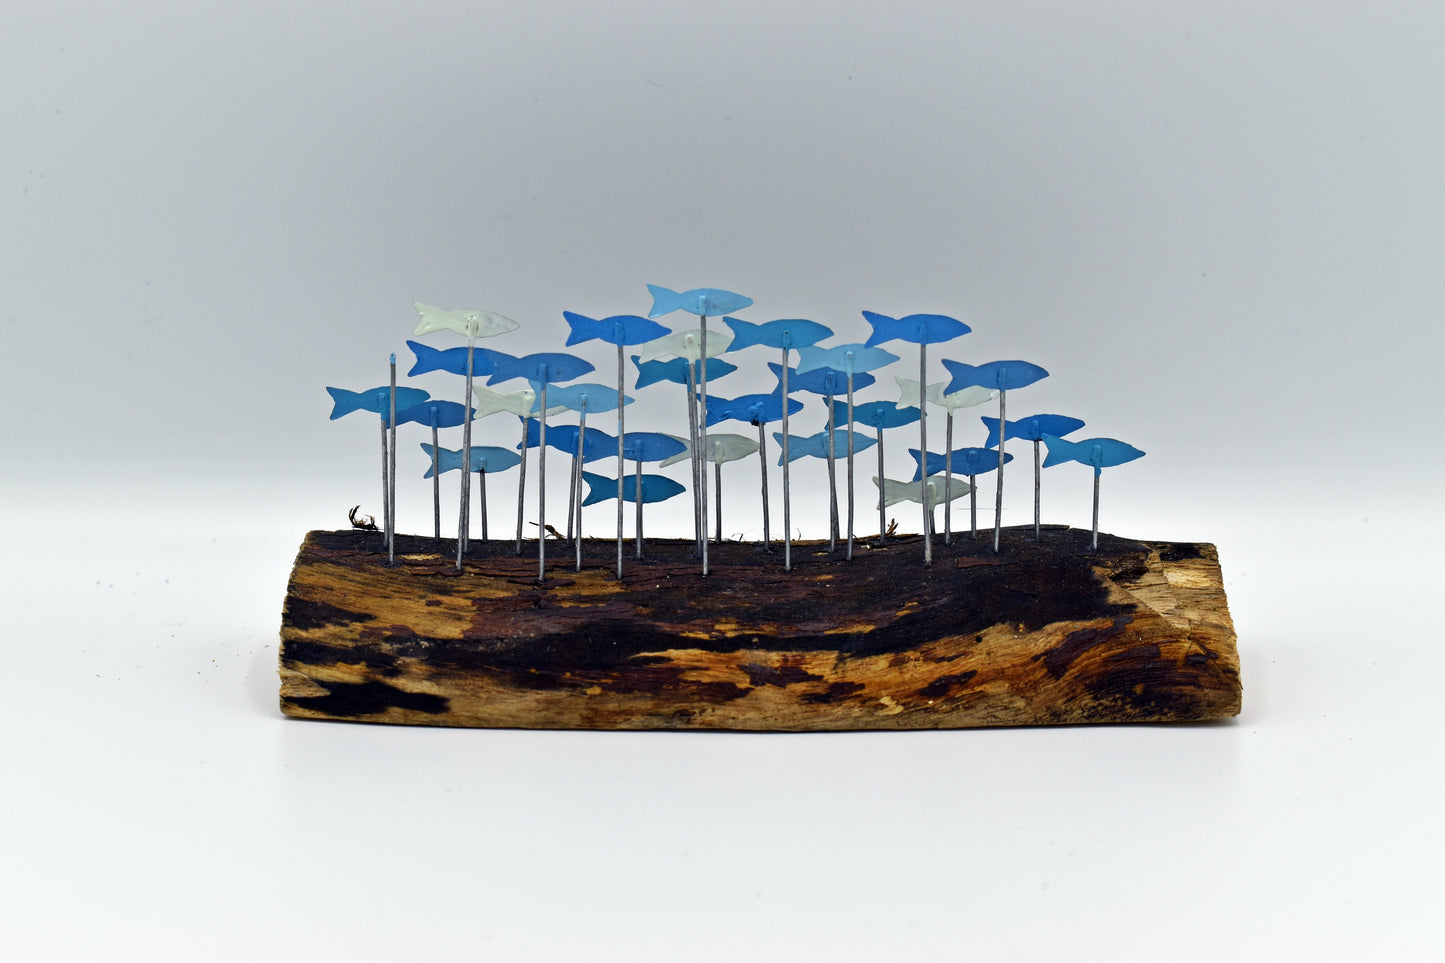 School of Anchovies a driftwood block